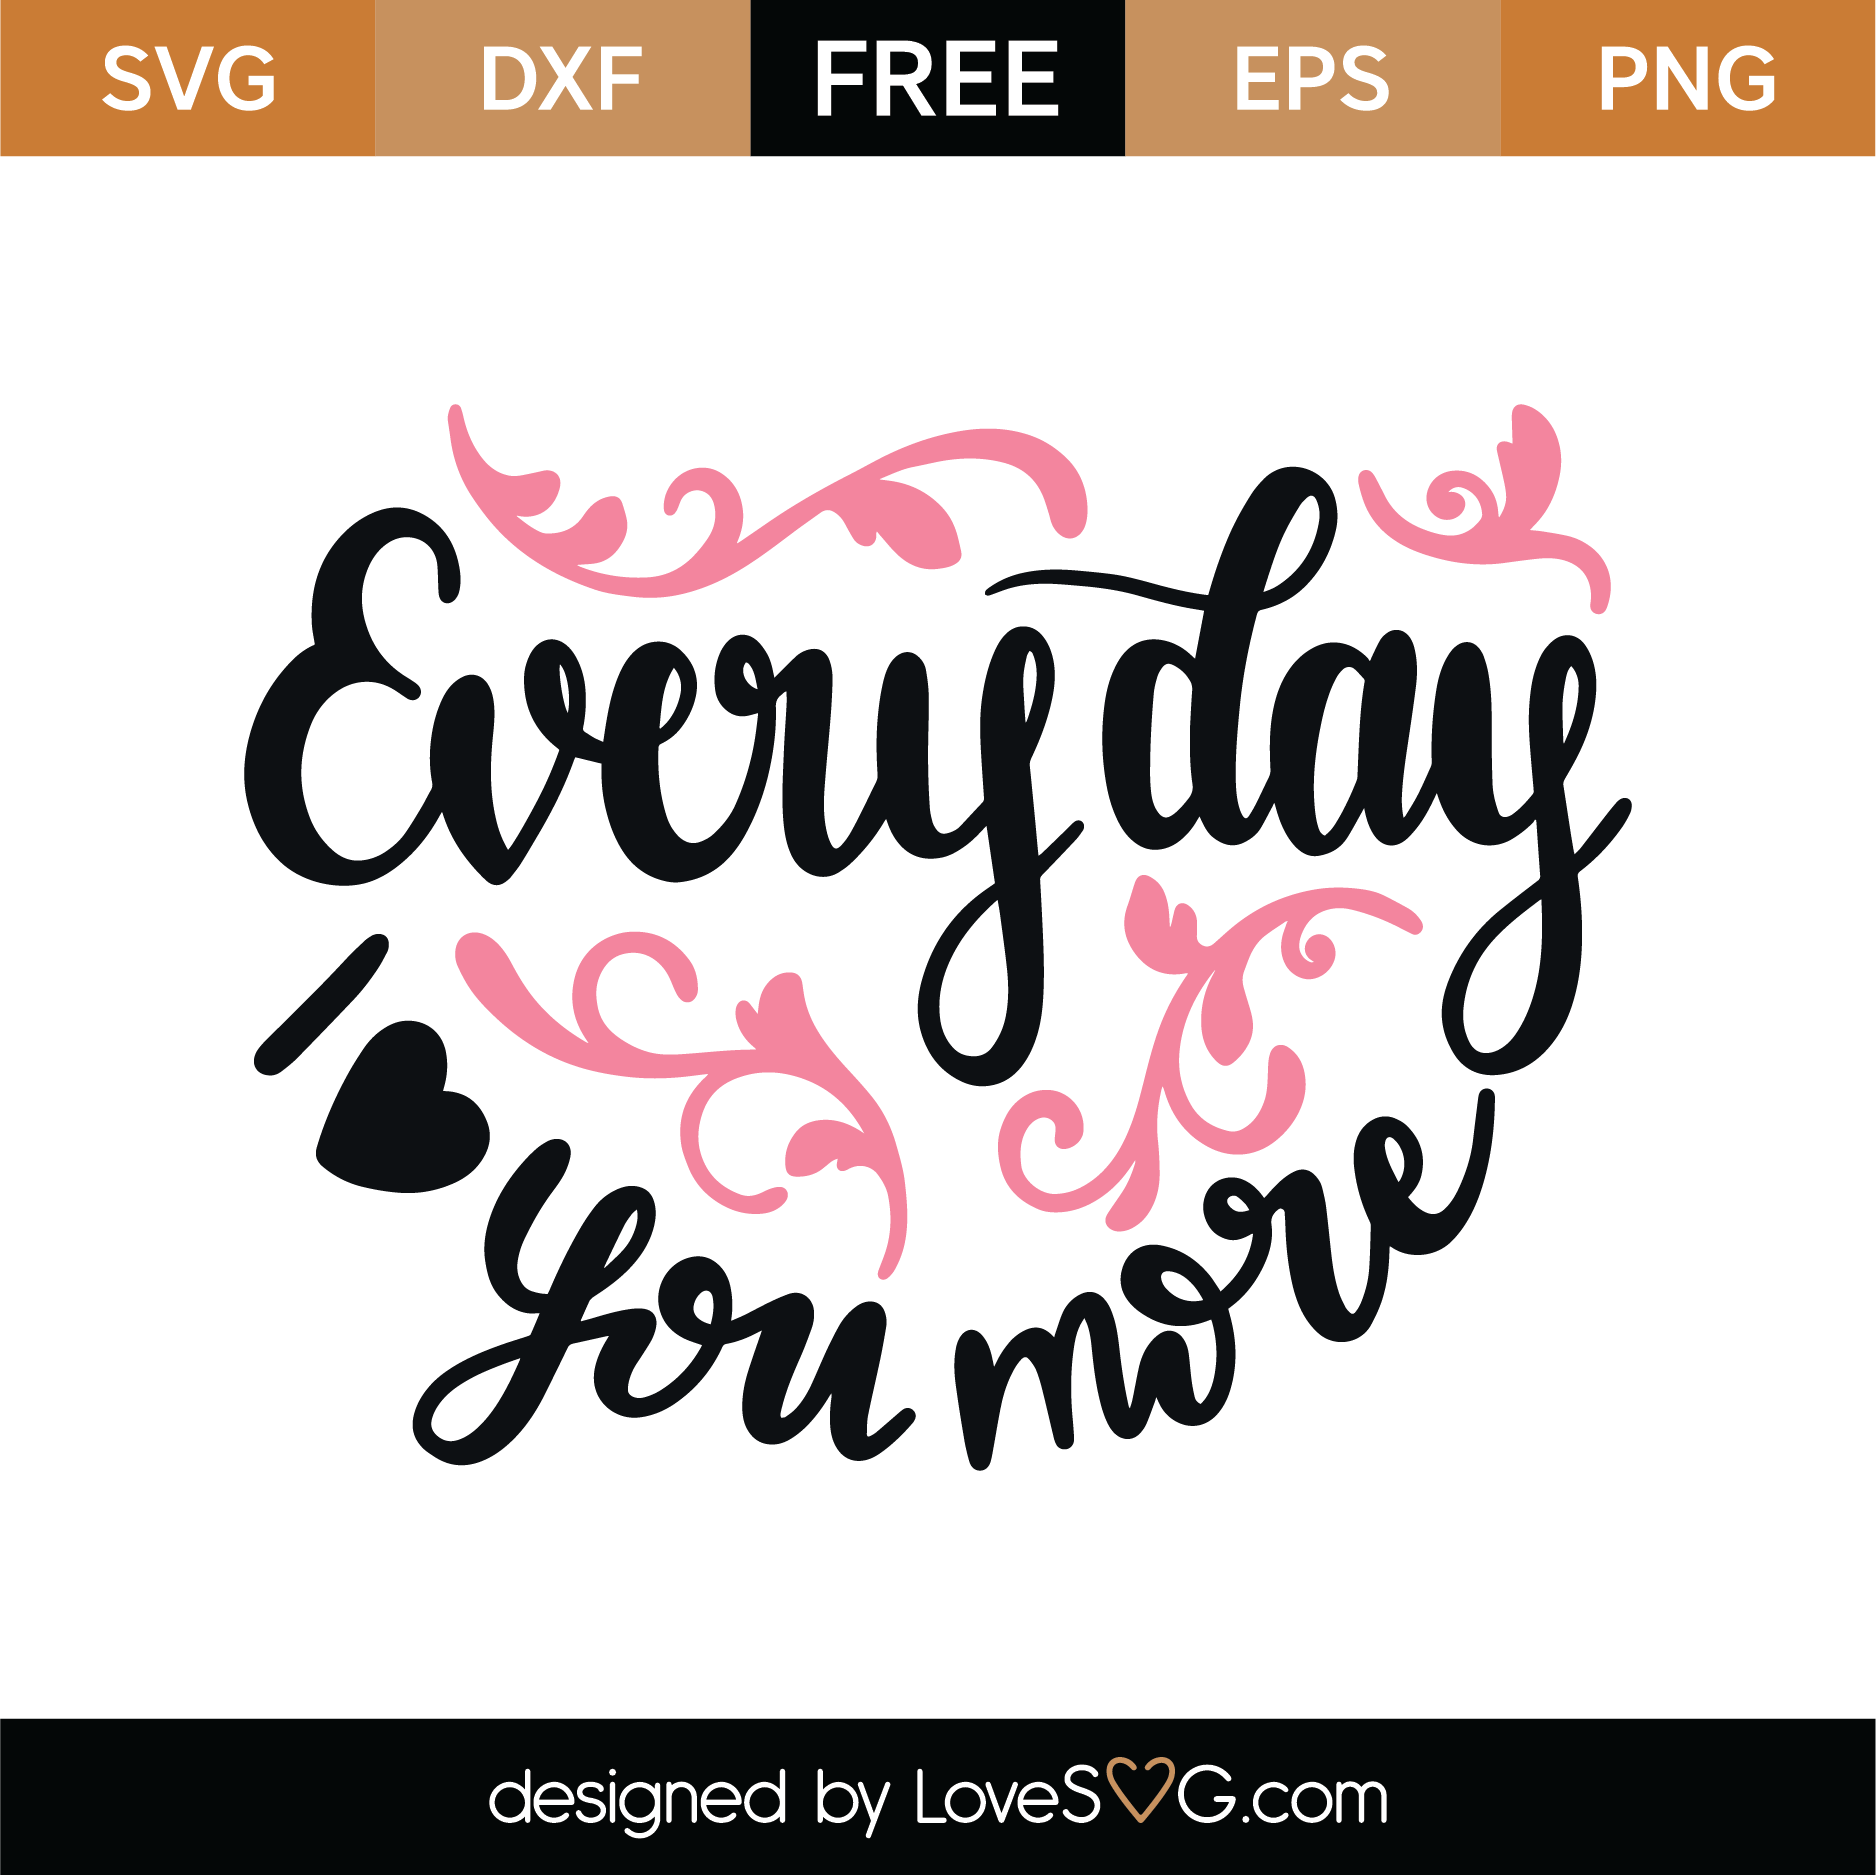 You Are Loved Svg / Free svg cut files | Lovesvg.com : You will also